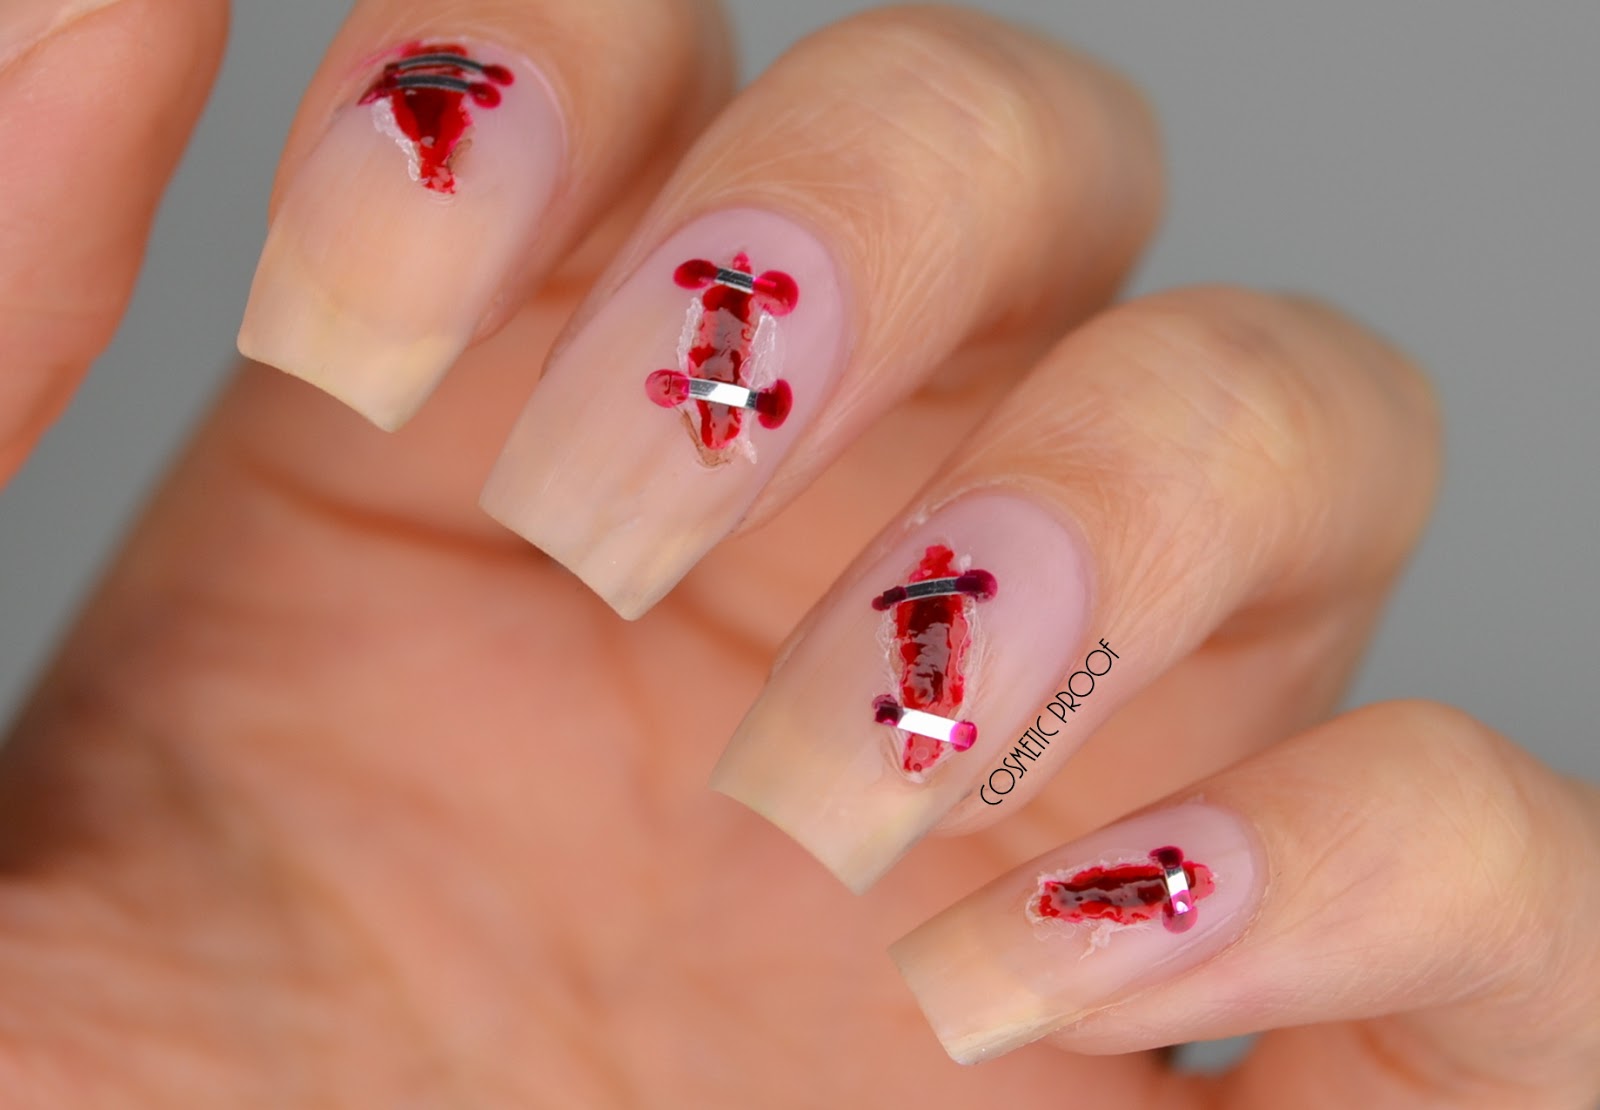 4. Bloody Vampire Nails - wide 5